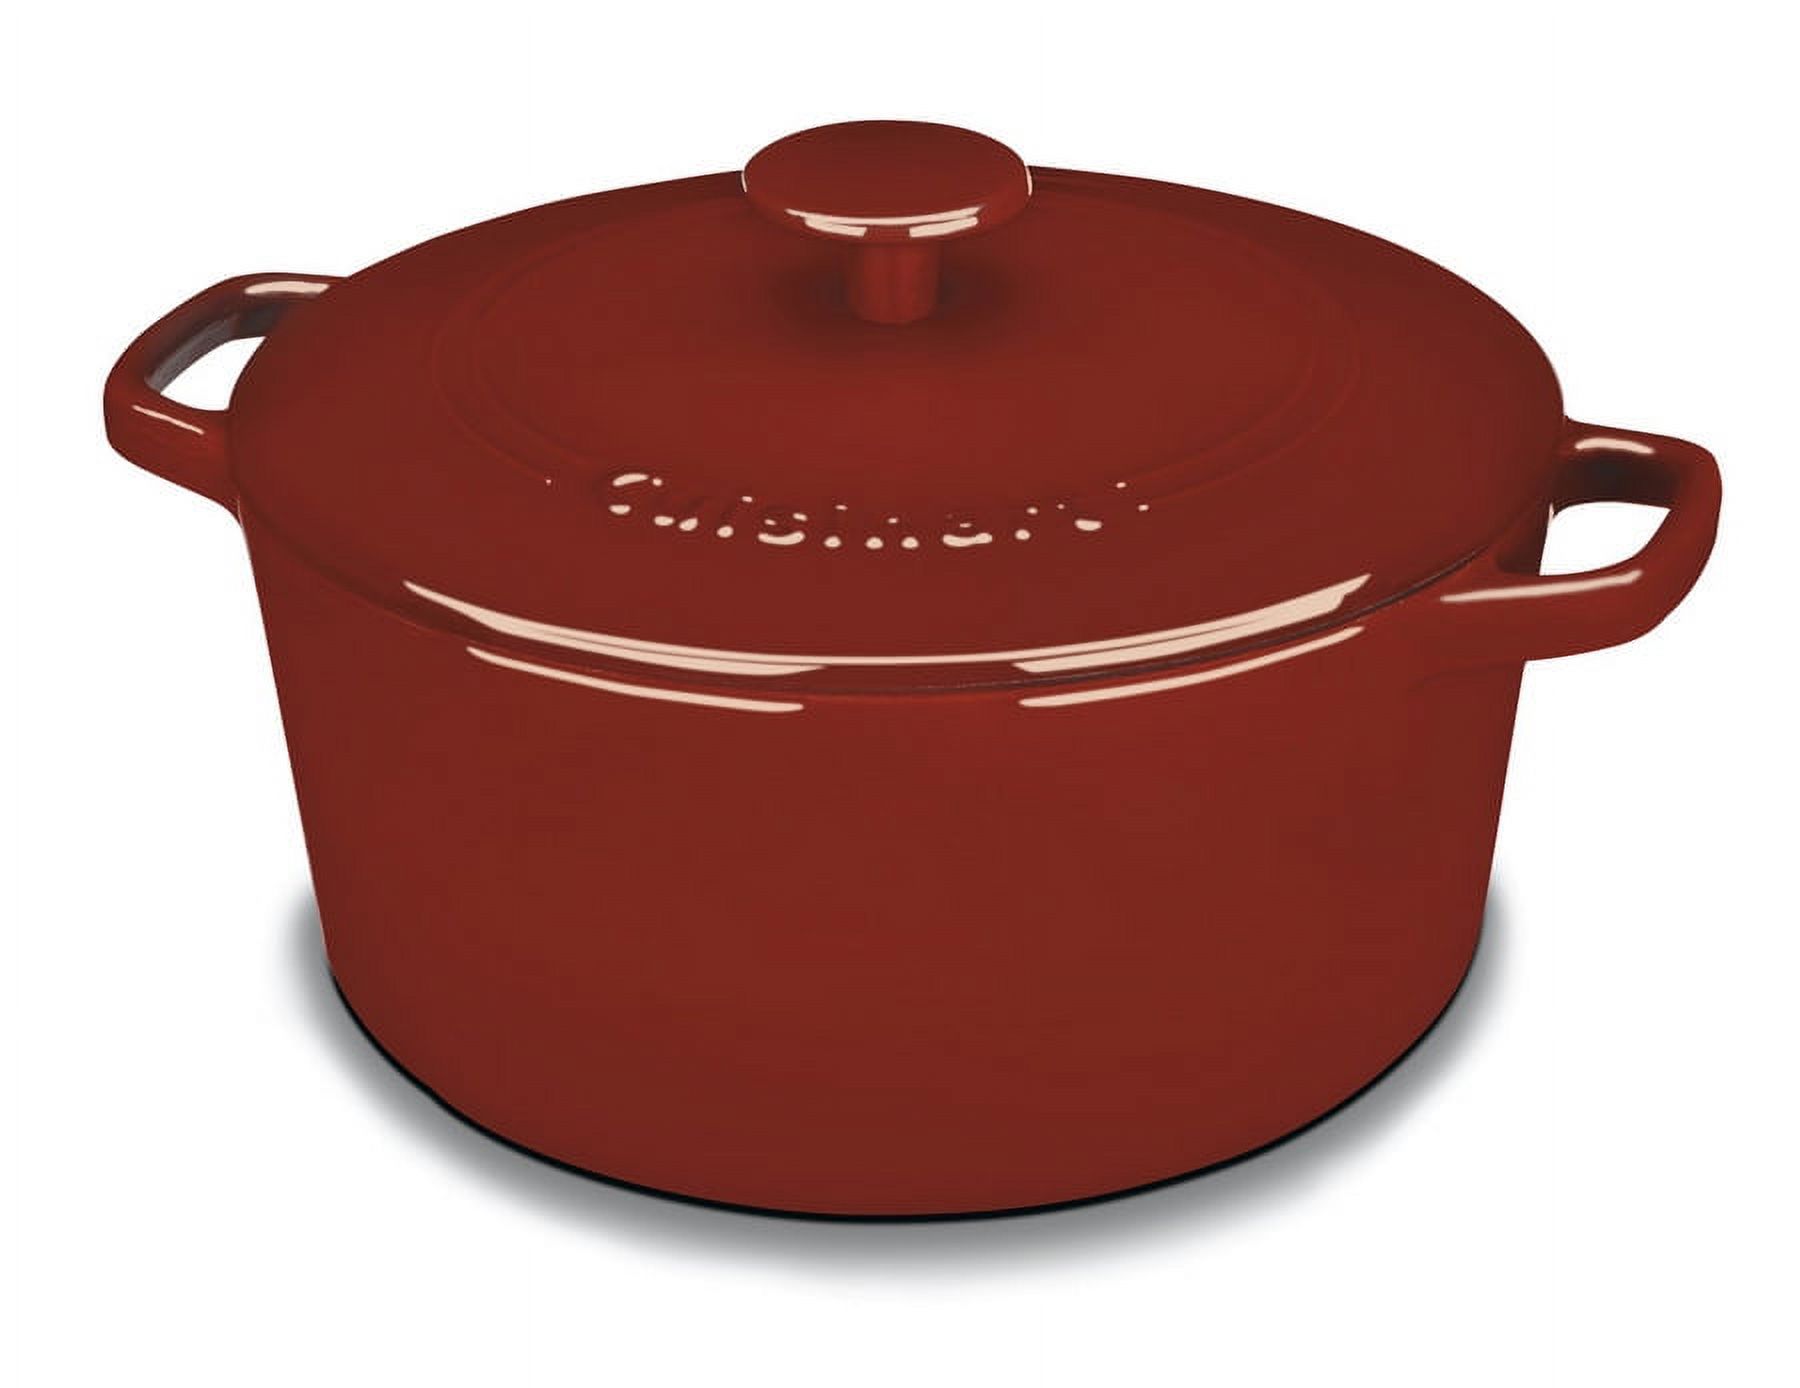 Cuisinart Chef'S Classic Enameled Cast Iron 5 Qt. Round Covered Casserole-Cardinal Red - image 1 of 5